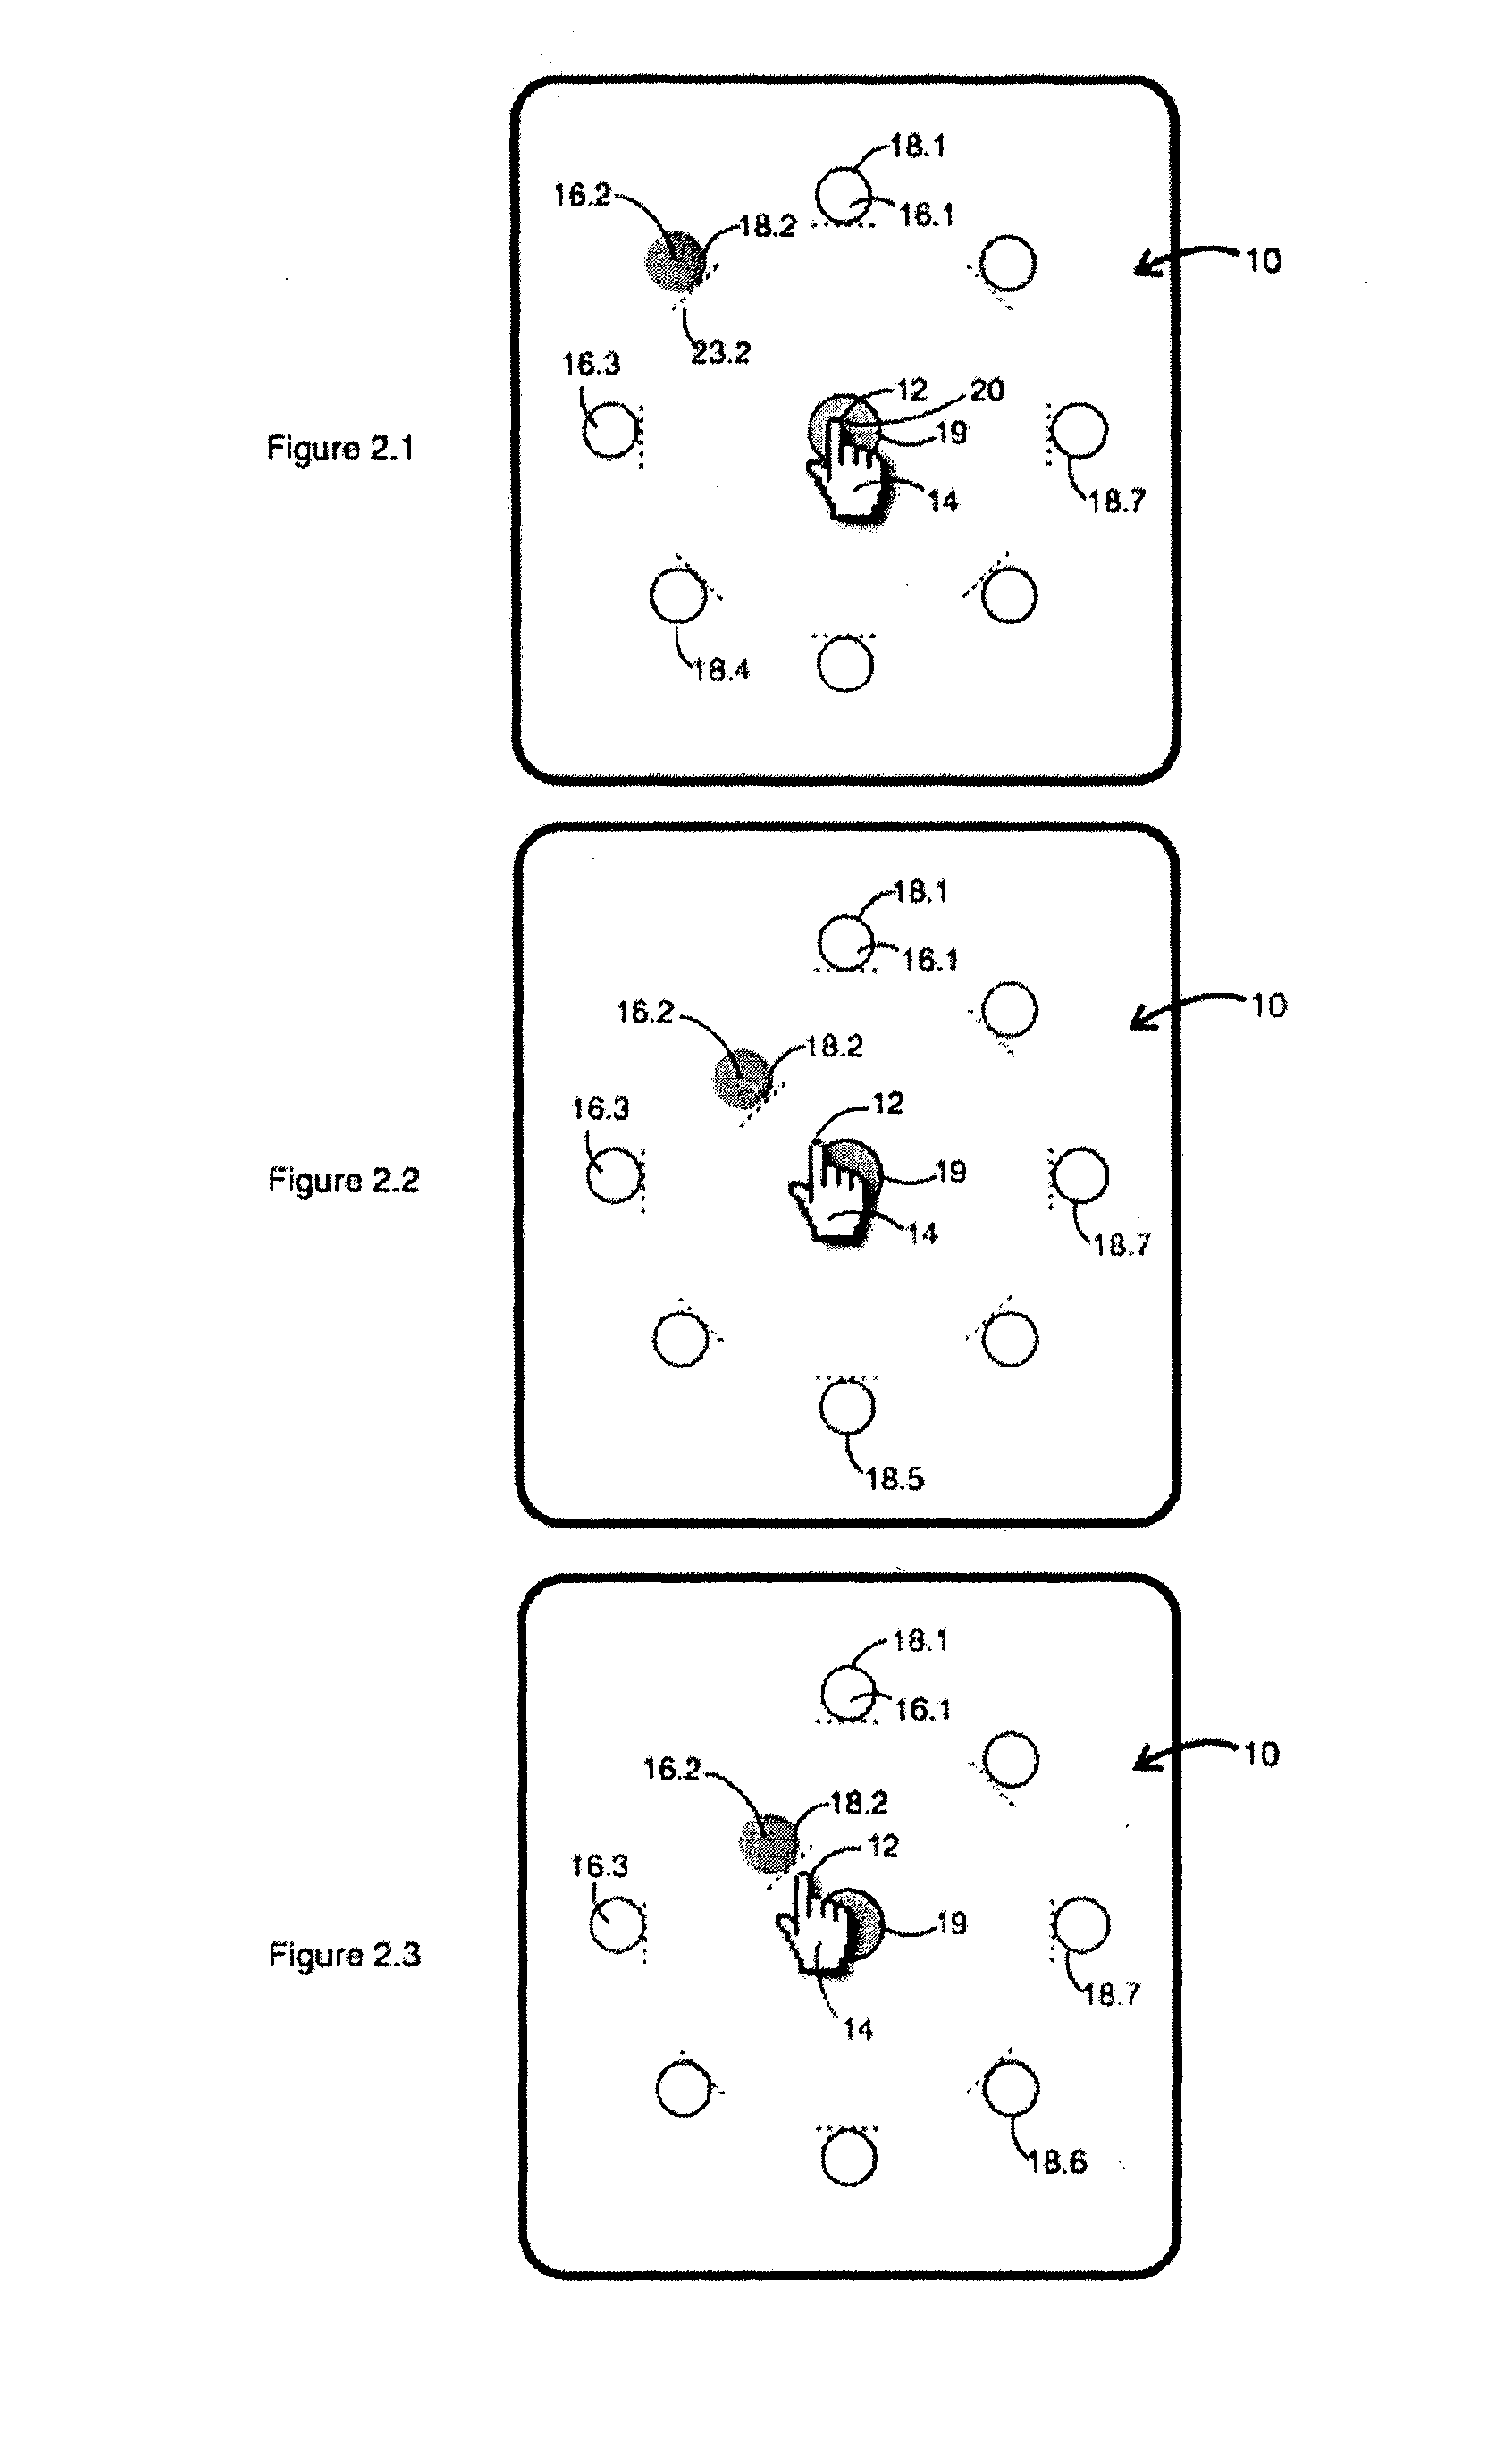 Method for Human-Computer Interaction on a Graphical User Interface (GUI)